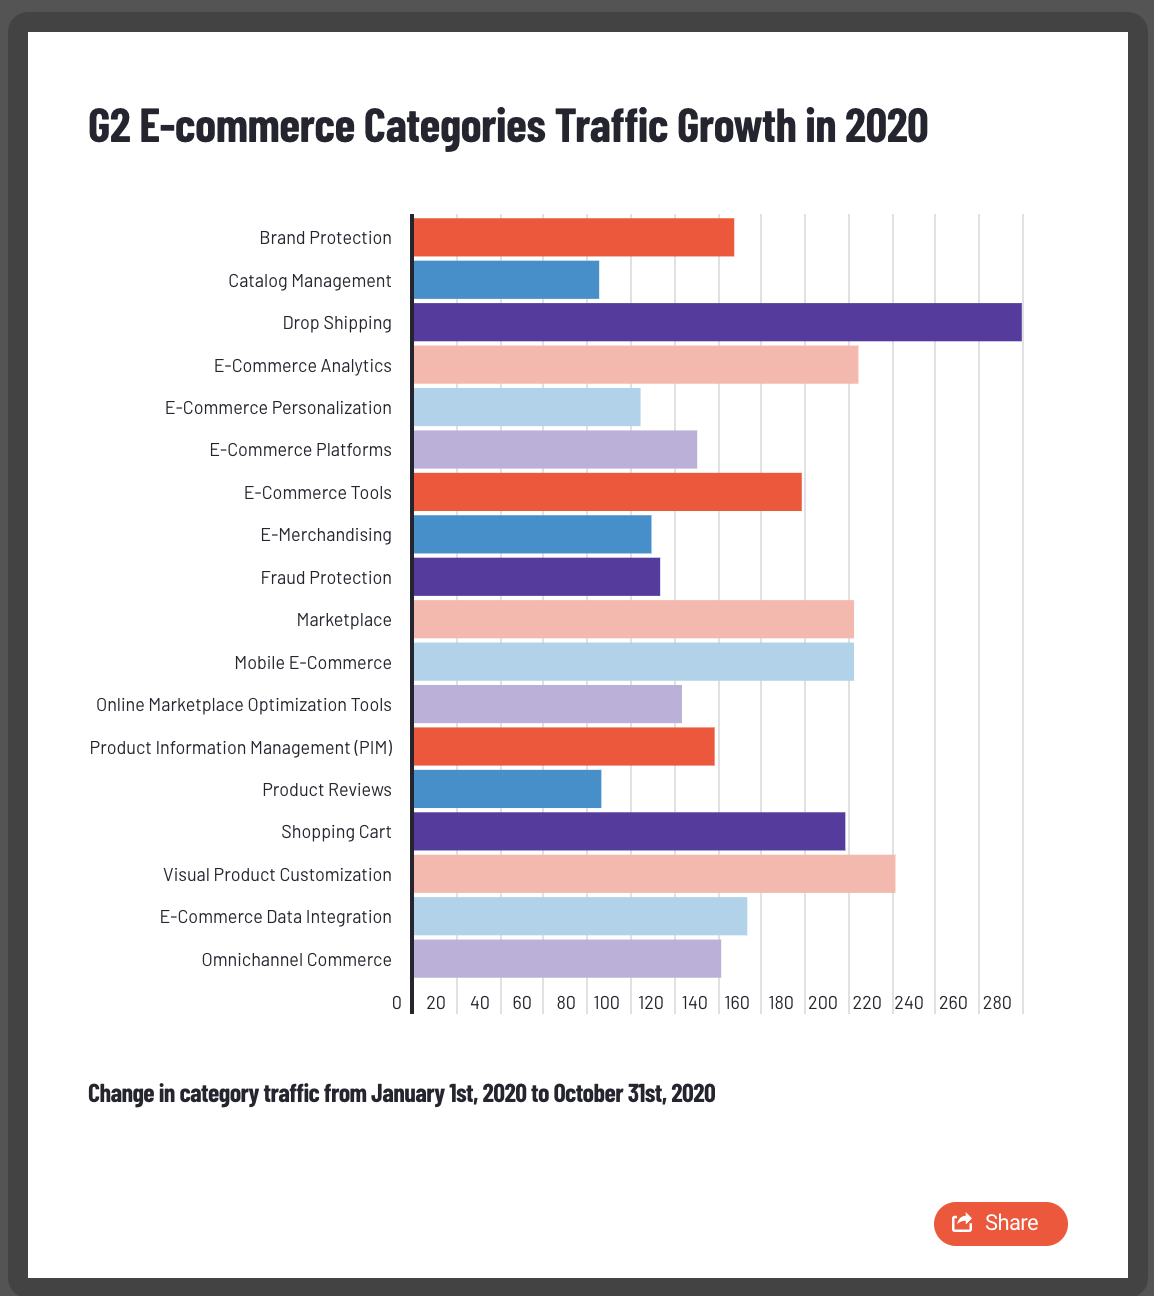 e-commerce category traffic growth in 2020 on G2